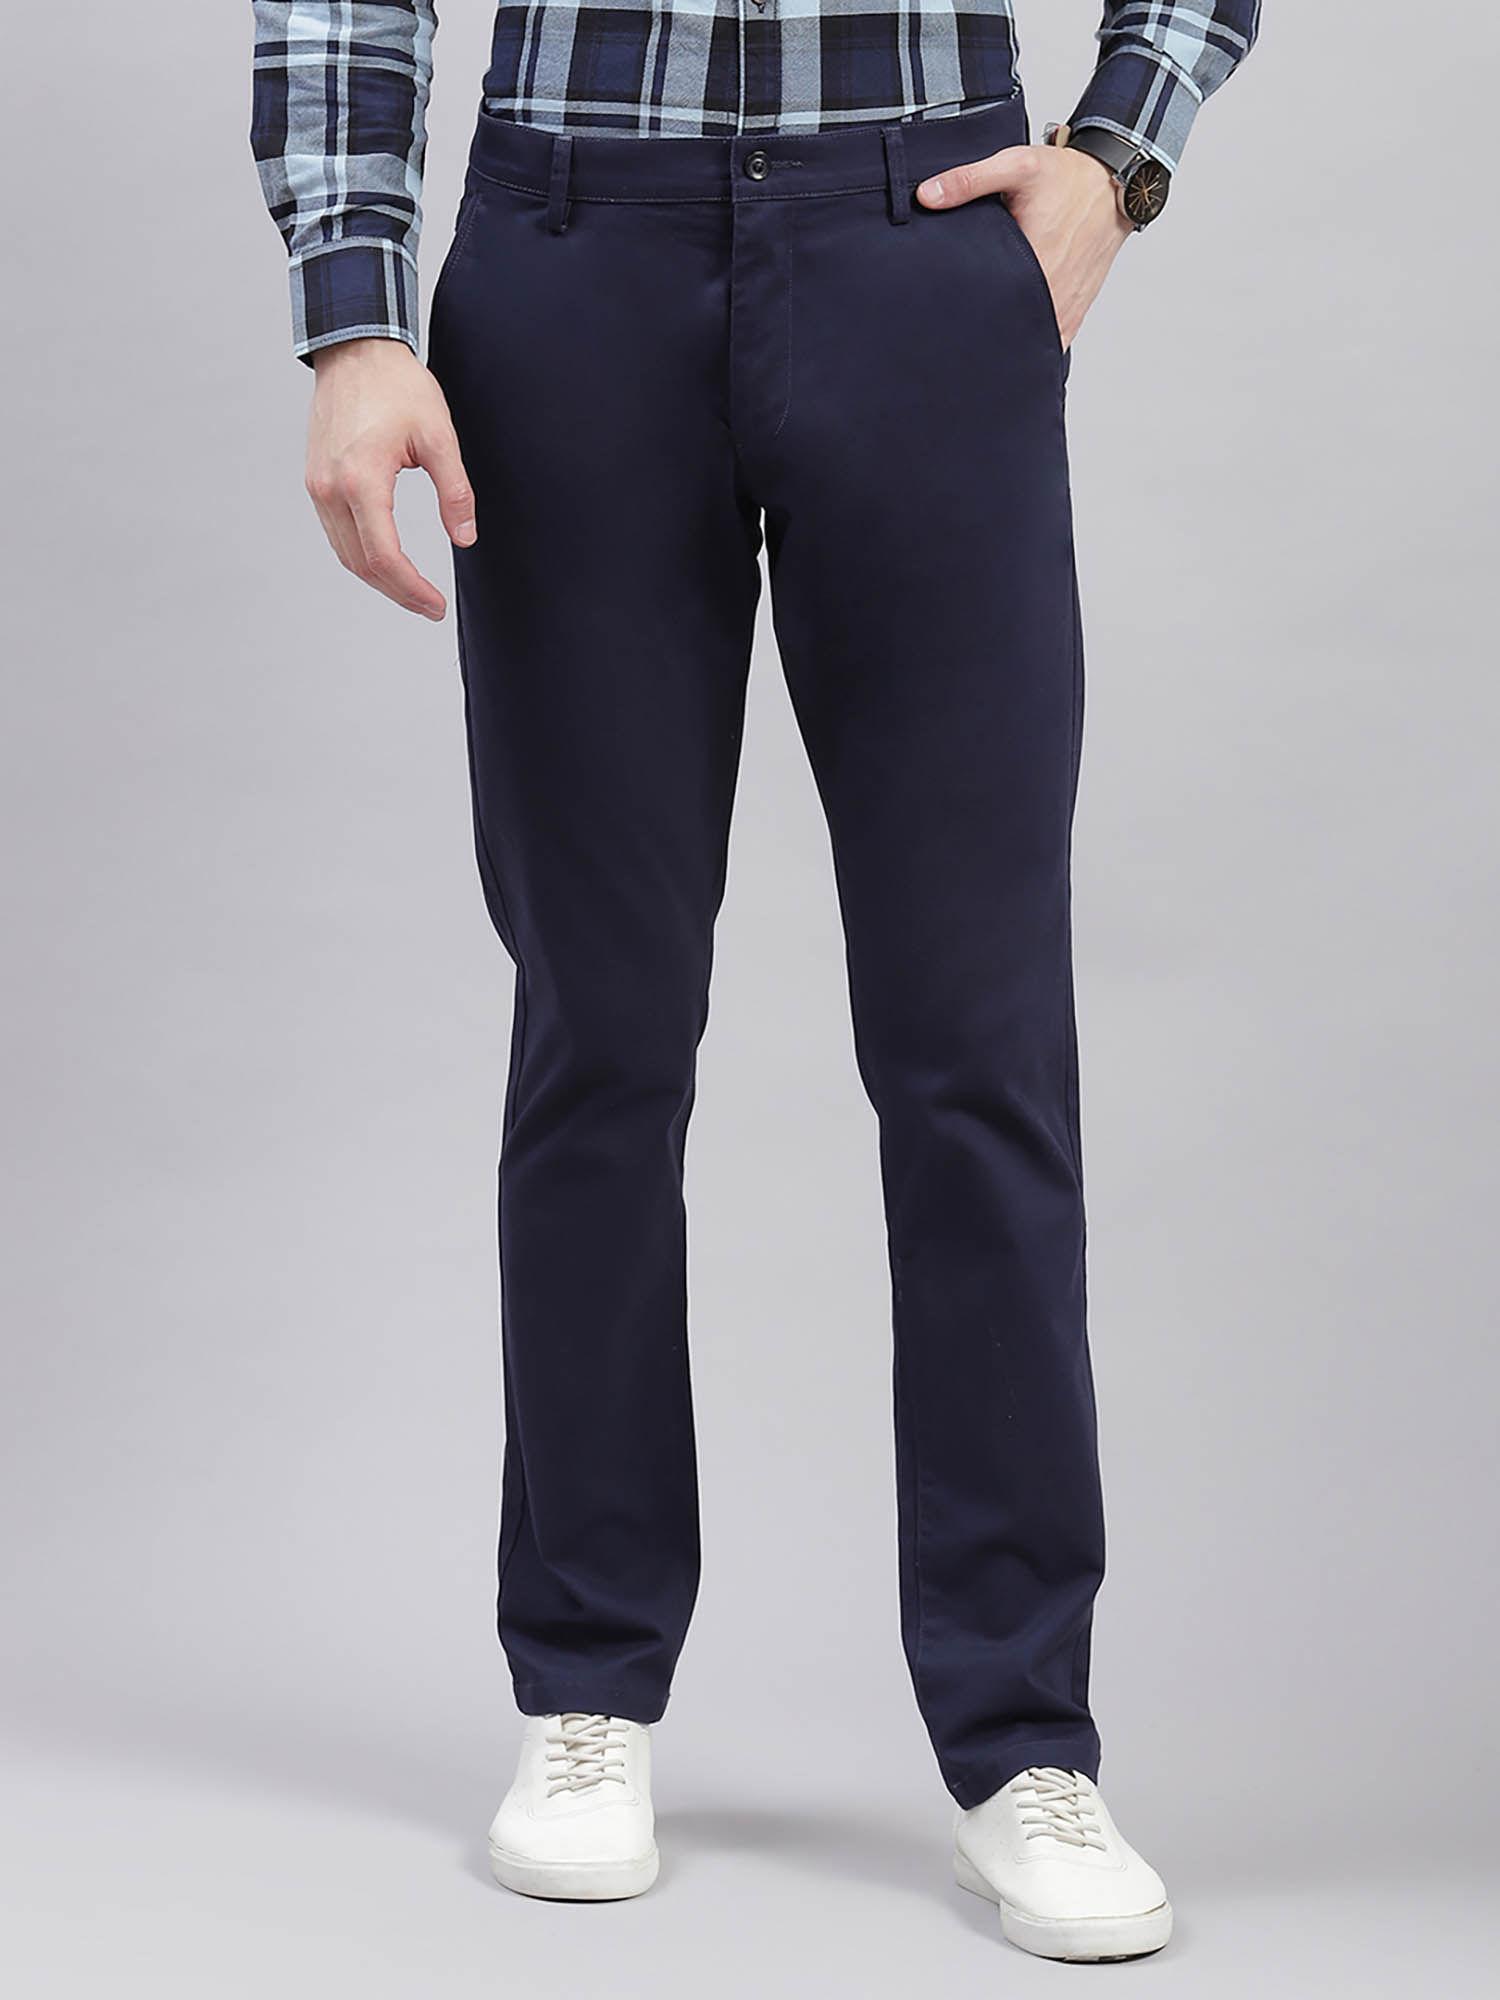 navy blue solid regular fit casual trouser